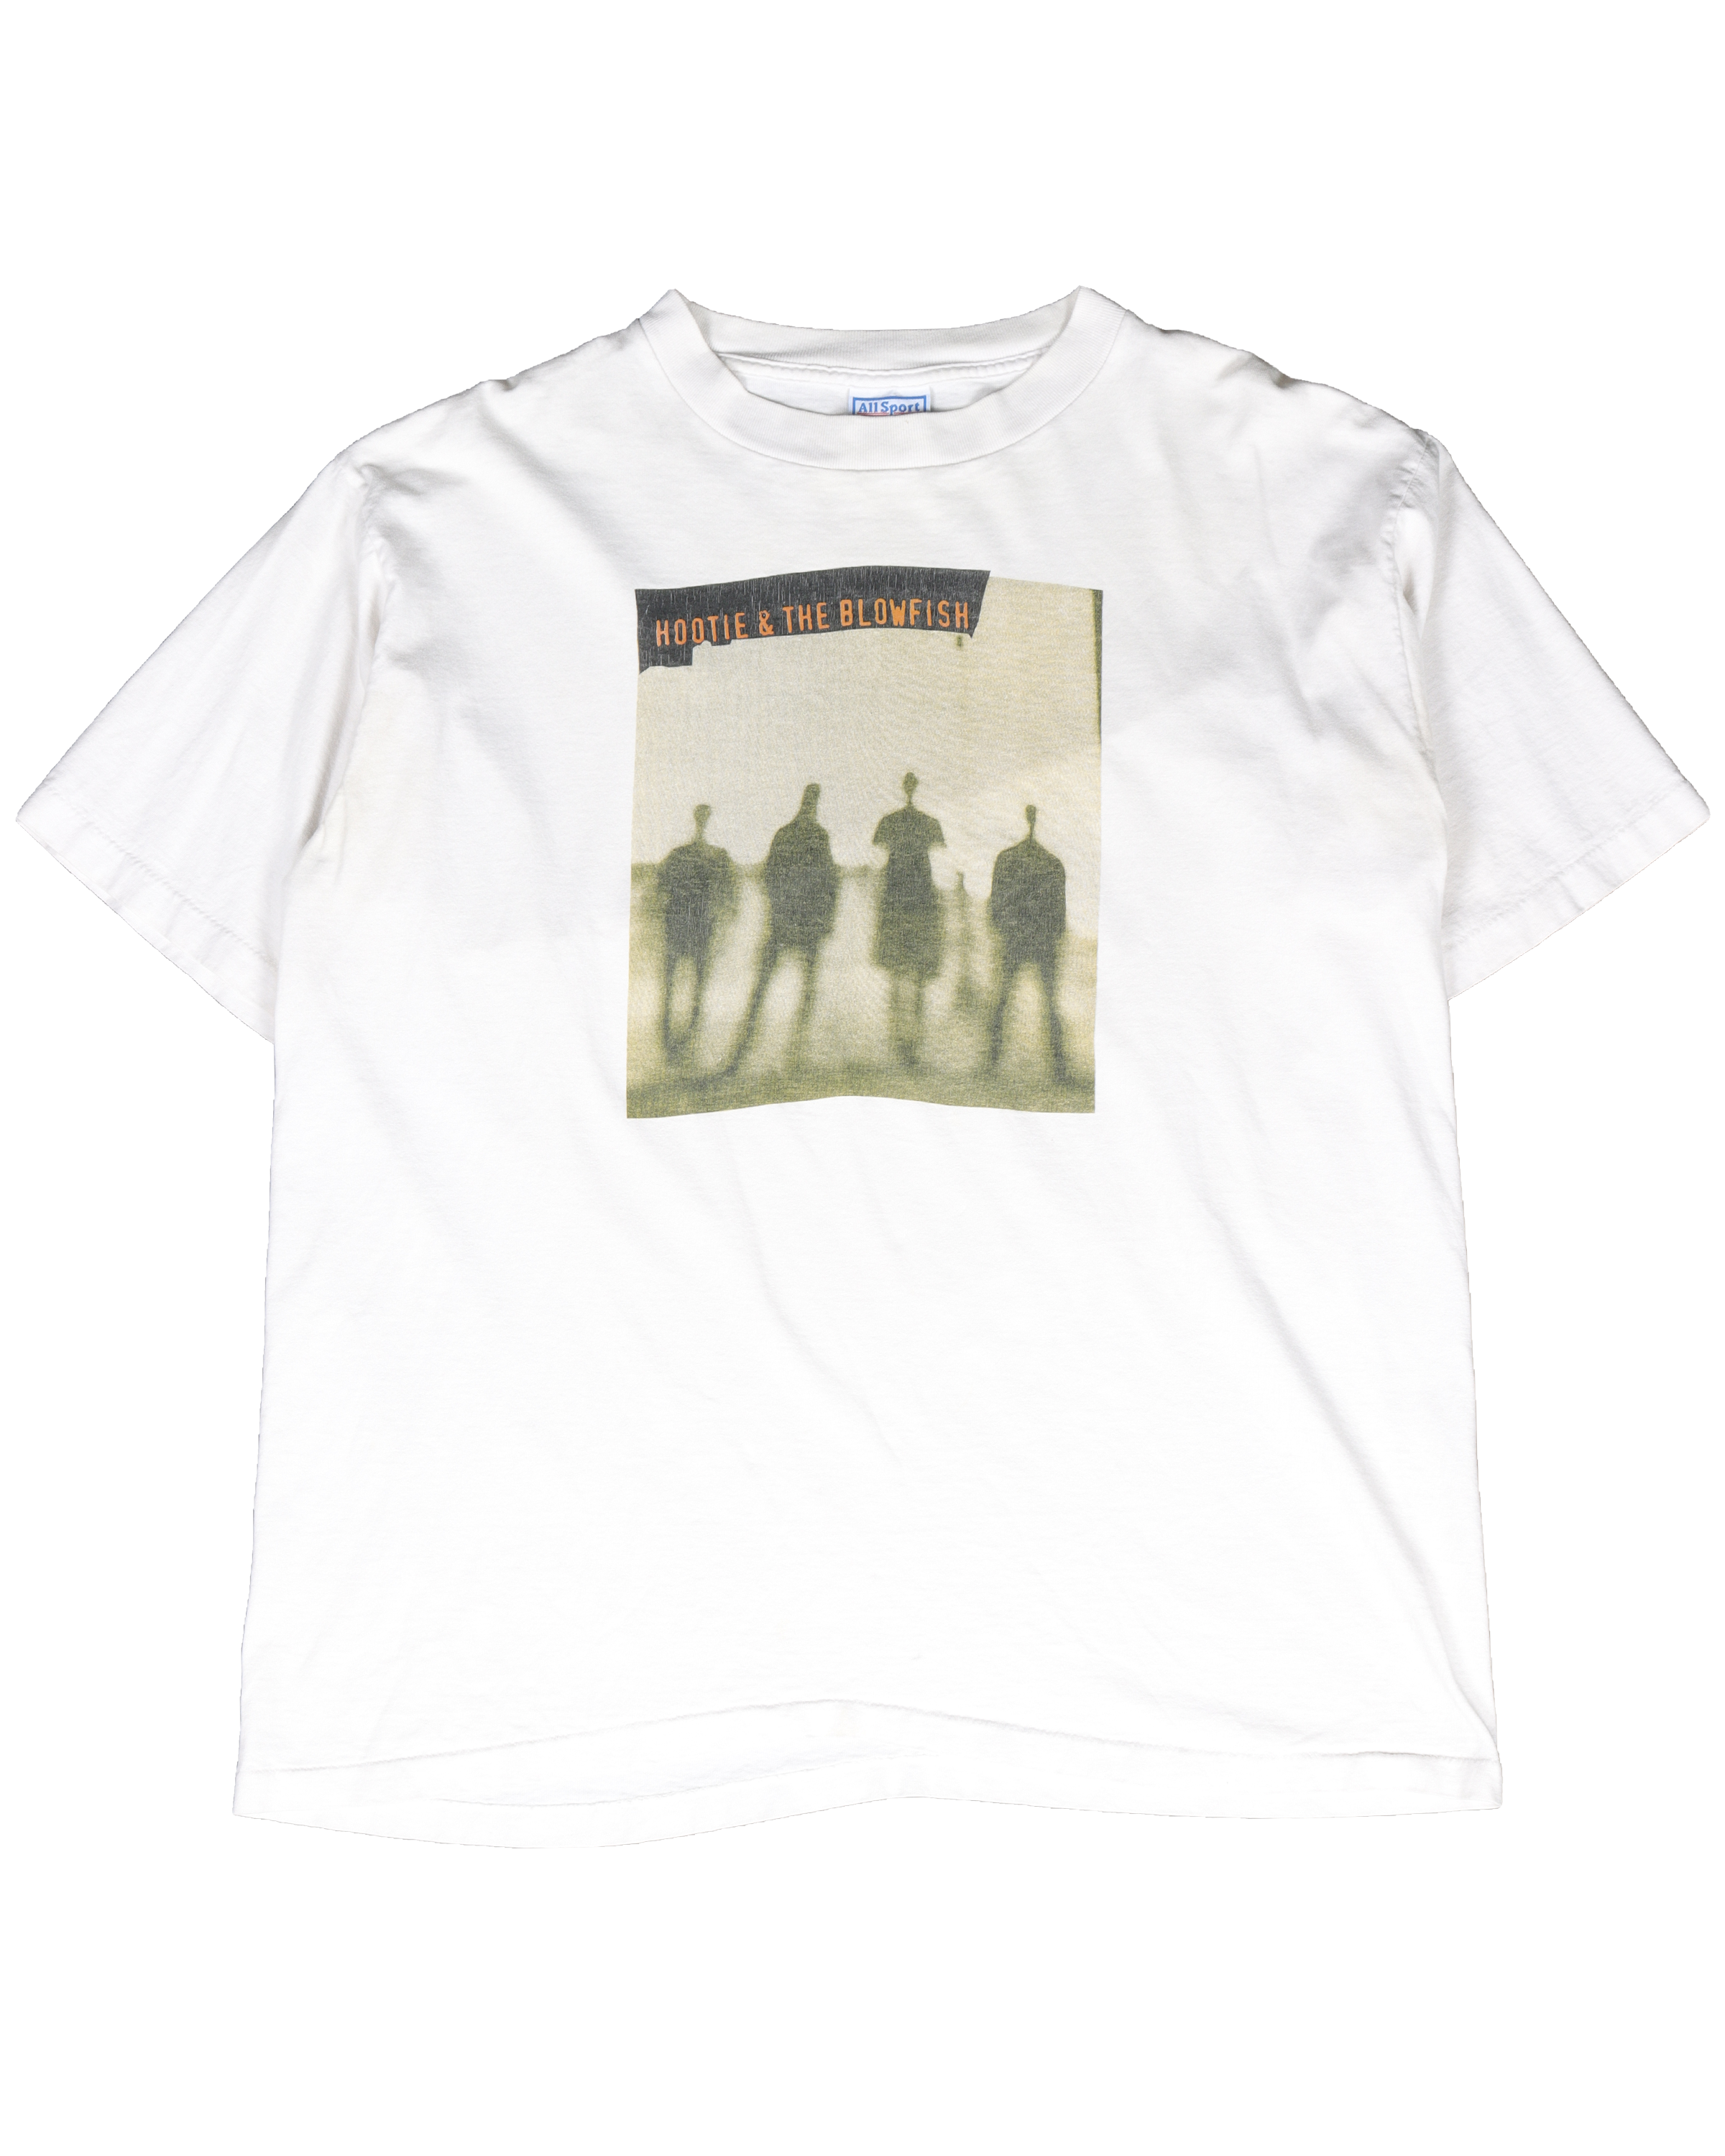 Hootie & The Blowfish "Cracked Rear View" Tour T-Shirt (1994)